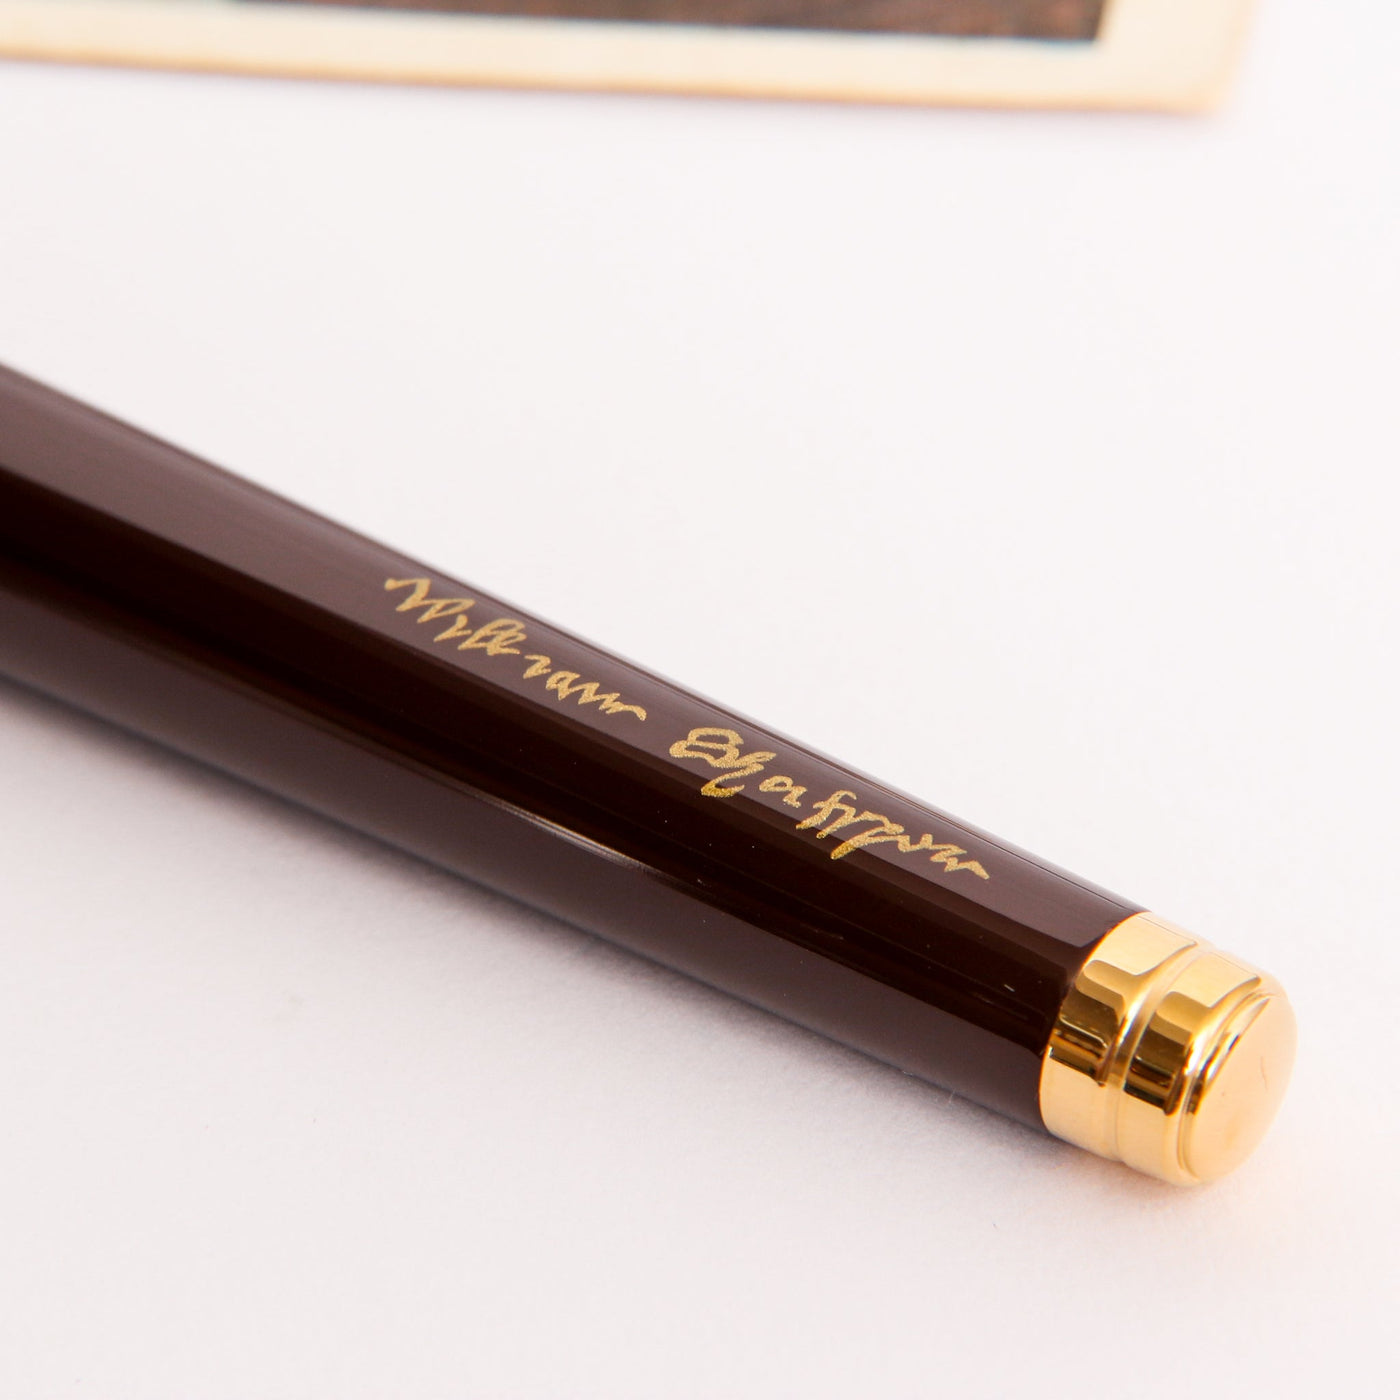 ST Dupont Line D Limited Edition William Shakespeare Fountain Pen Signature On Barrel